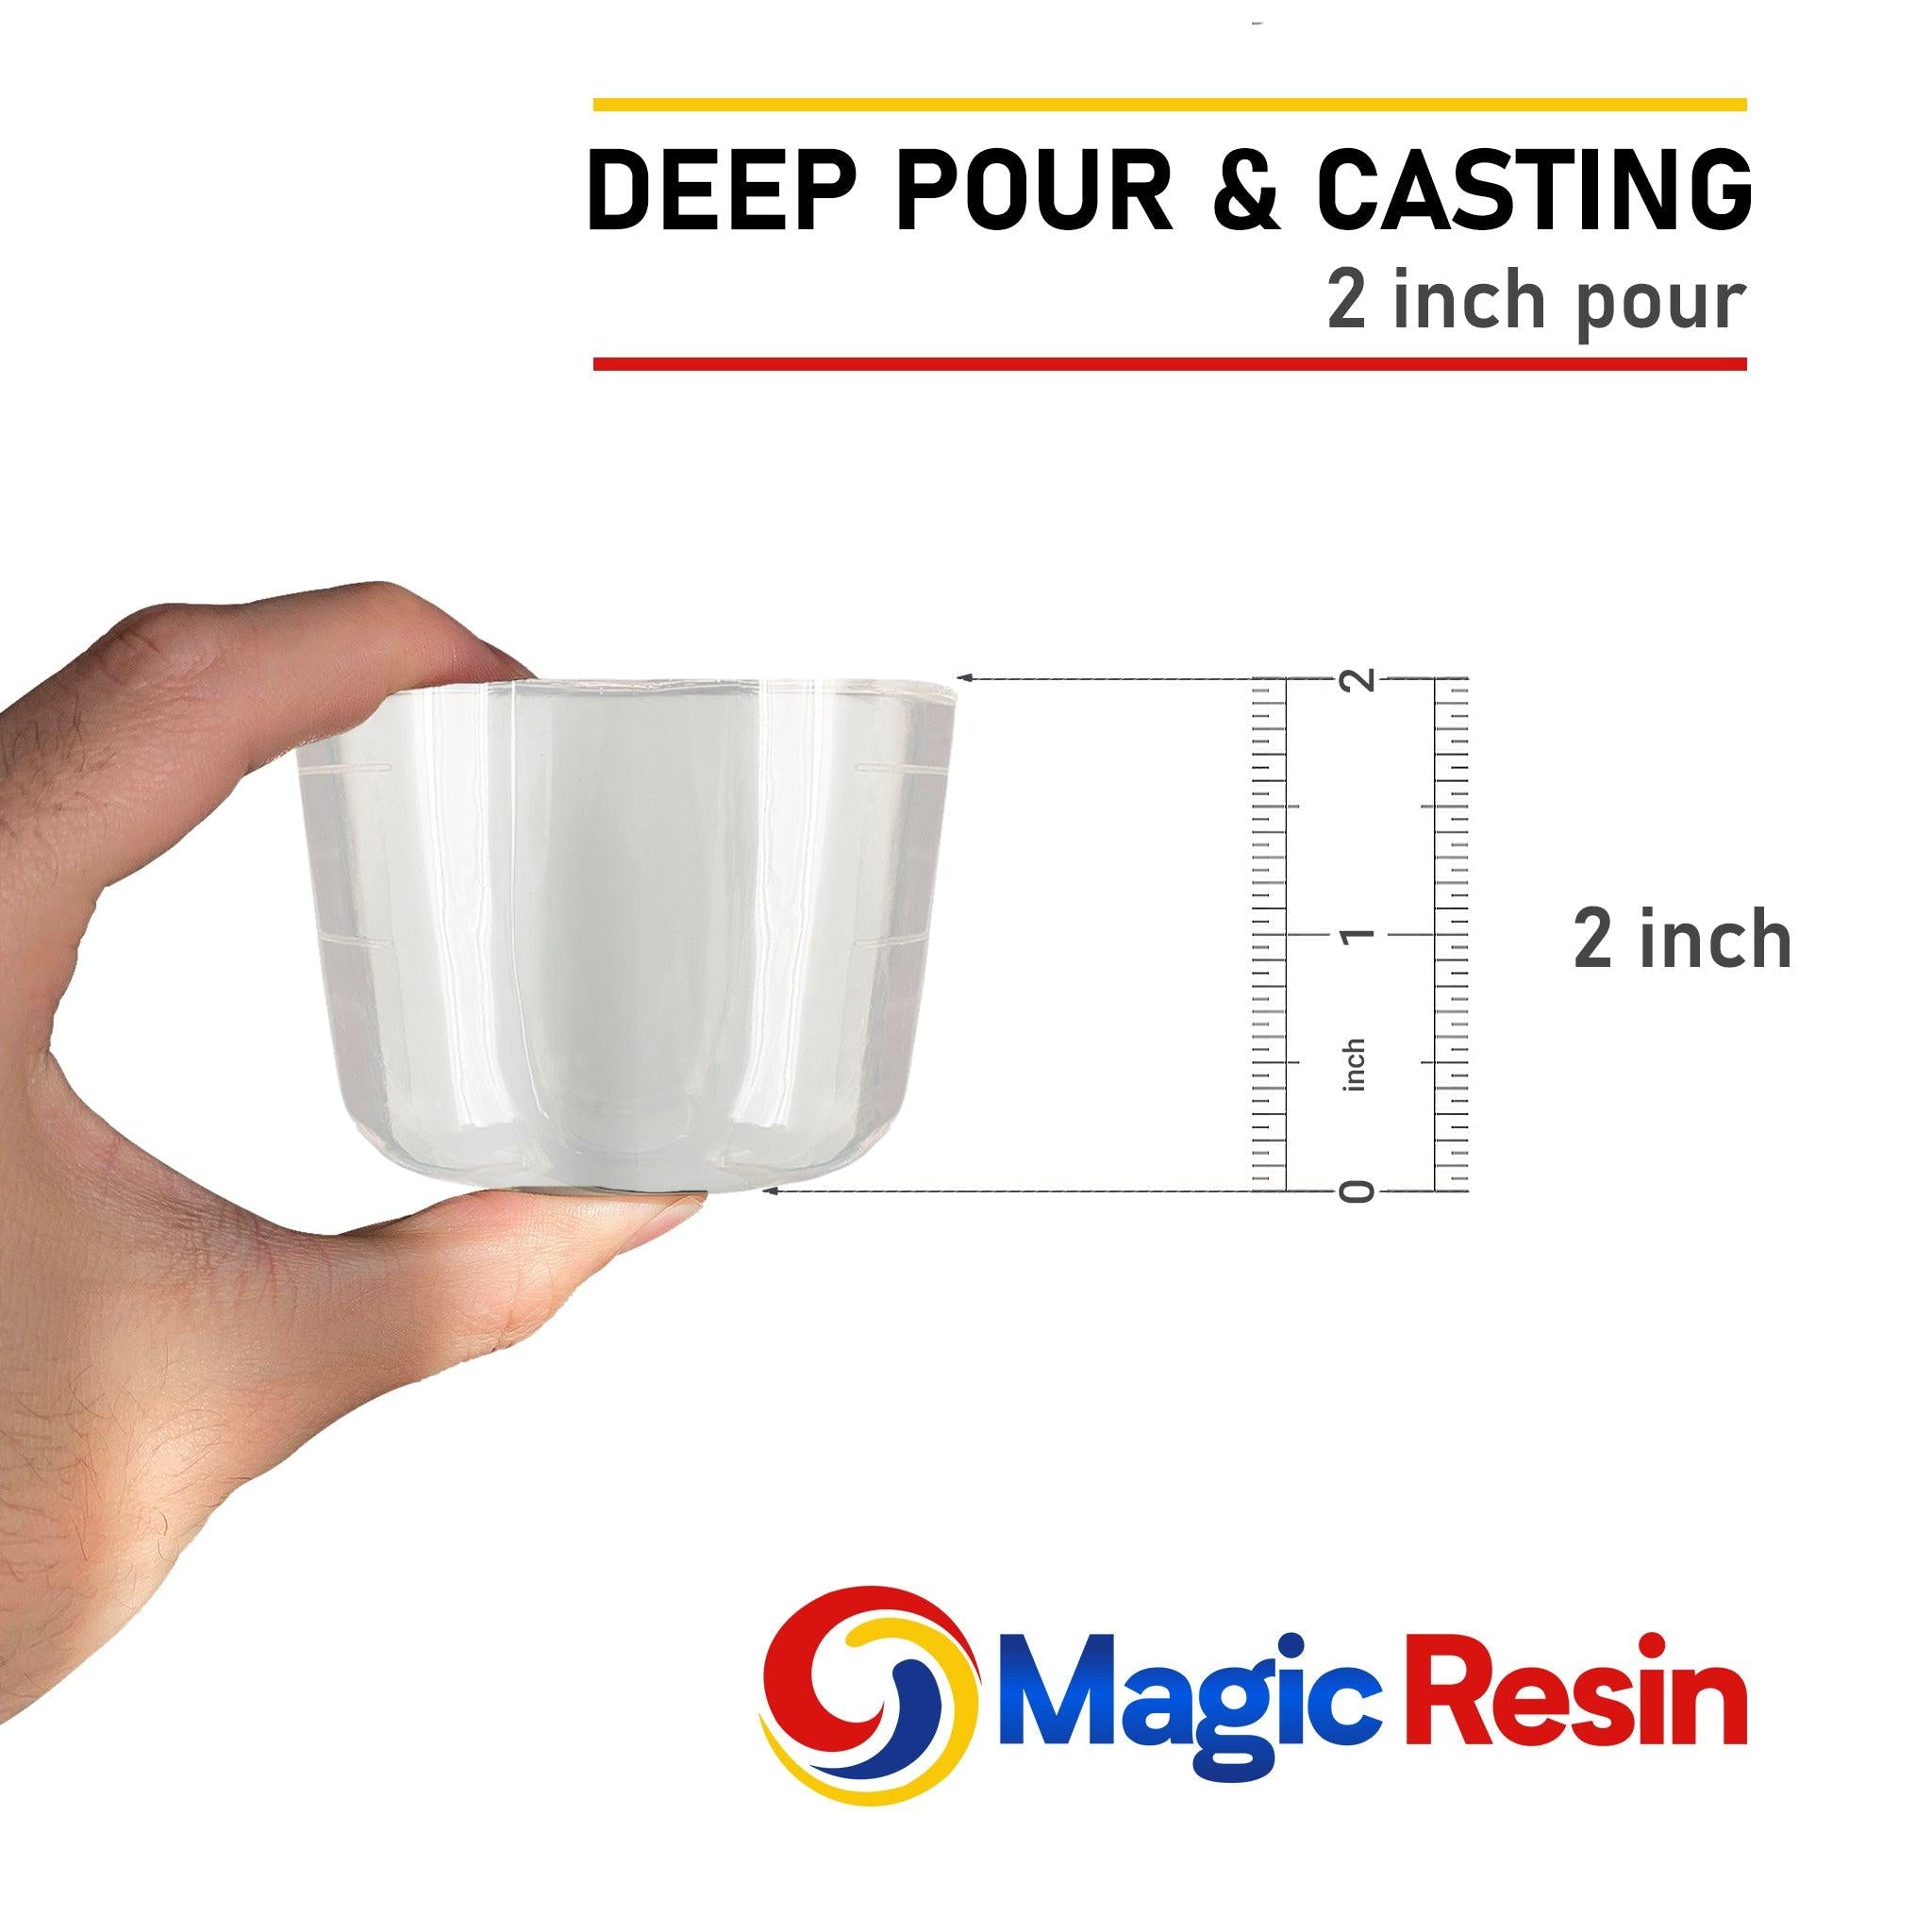 Deep Pour Craft Resin 1.5 Gallon Kit. For up to 2 Inch Casting